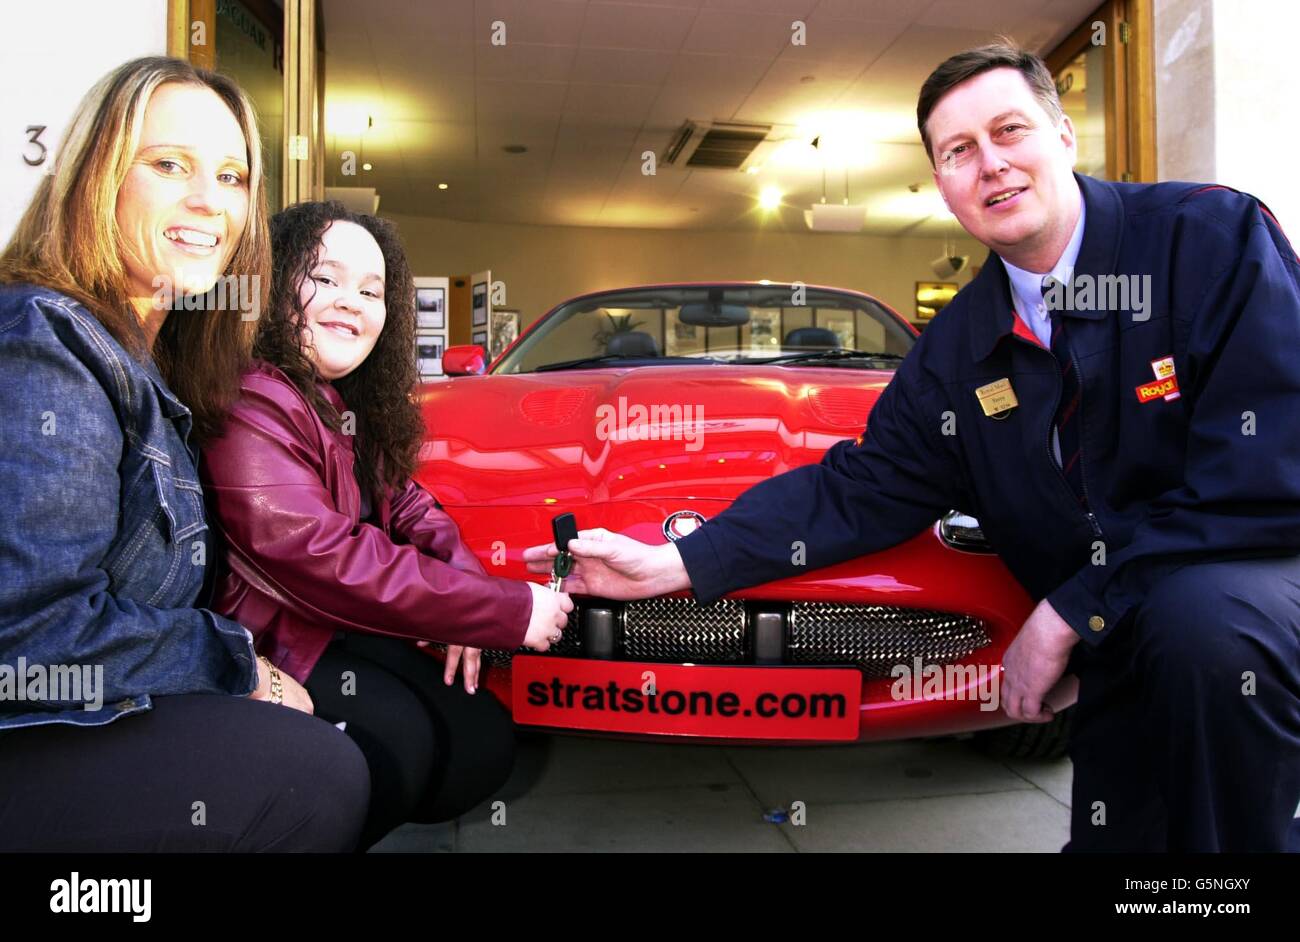 Postman Terry Austen, ands over the keys of a Jaguar XK8 to Kierah Calver, 11, from Ipswich, as her mother Traci looks on, during a photocall at the Jaguar showroom in London's Park Lane. Kierah, won a pair of Jaguar XK8 convertibles, * after winning the Royal Mail's Love Draw competition, in which her card, with a heart drawn on the back of it, was picked at random from over 12 million items of mail. How ever it was mum Traci, who received the two cars because under the stipulation of the terms and conditions of the Love Draw, Kierah was too young to win. Stock Photo